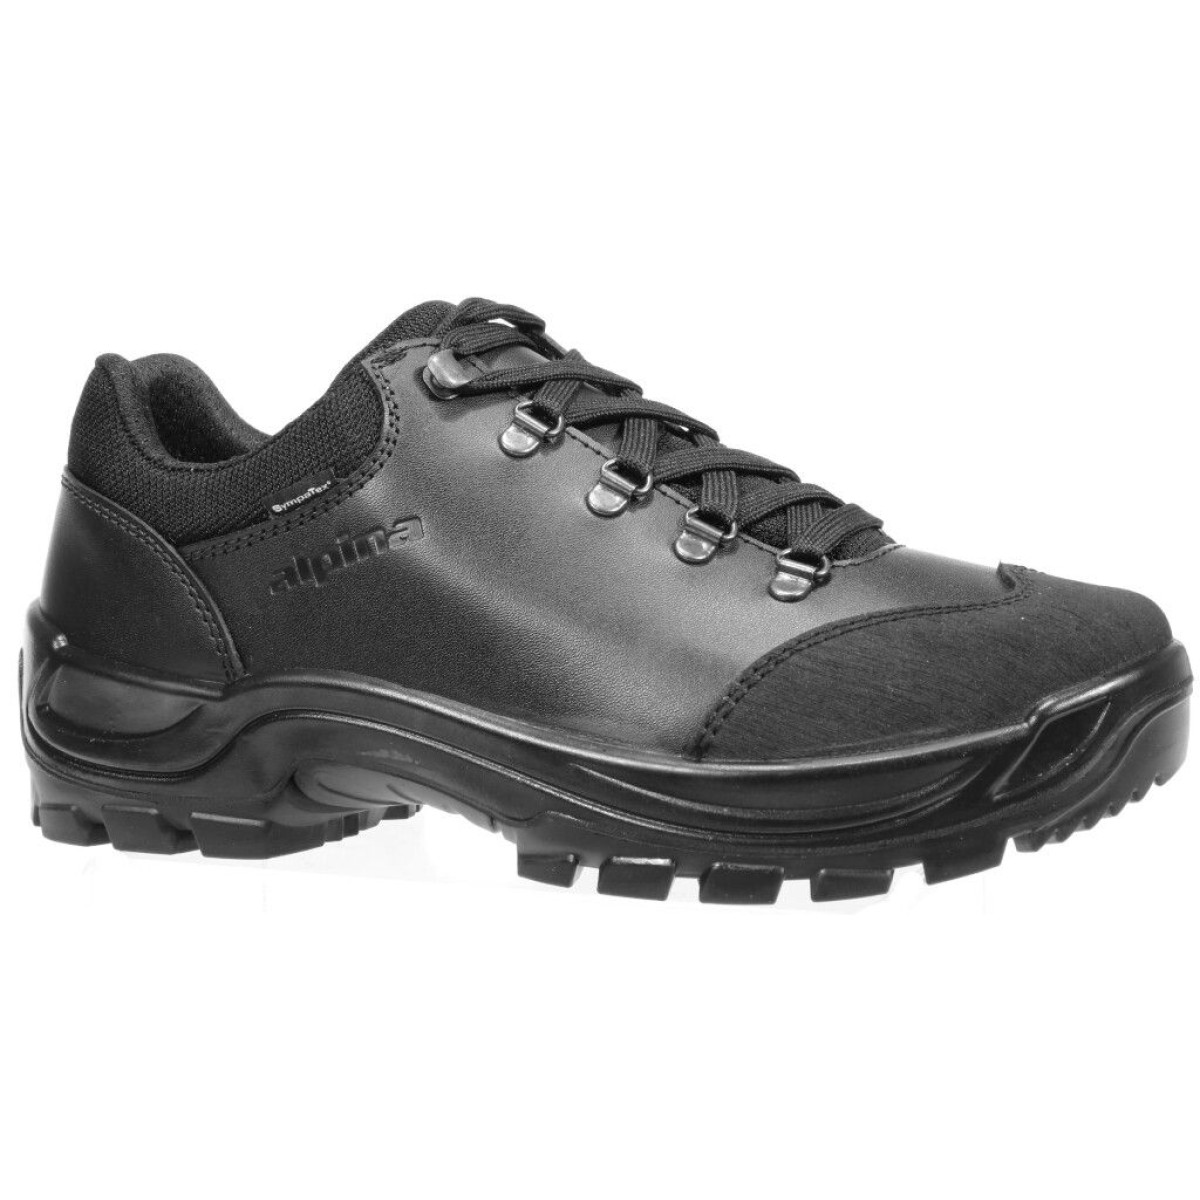 Dovre low black hiking shoes ALPINA - view 1